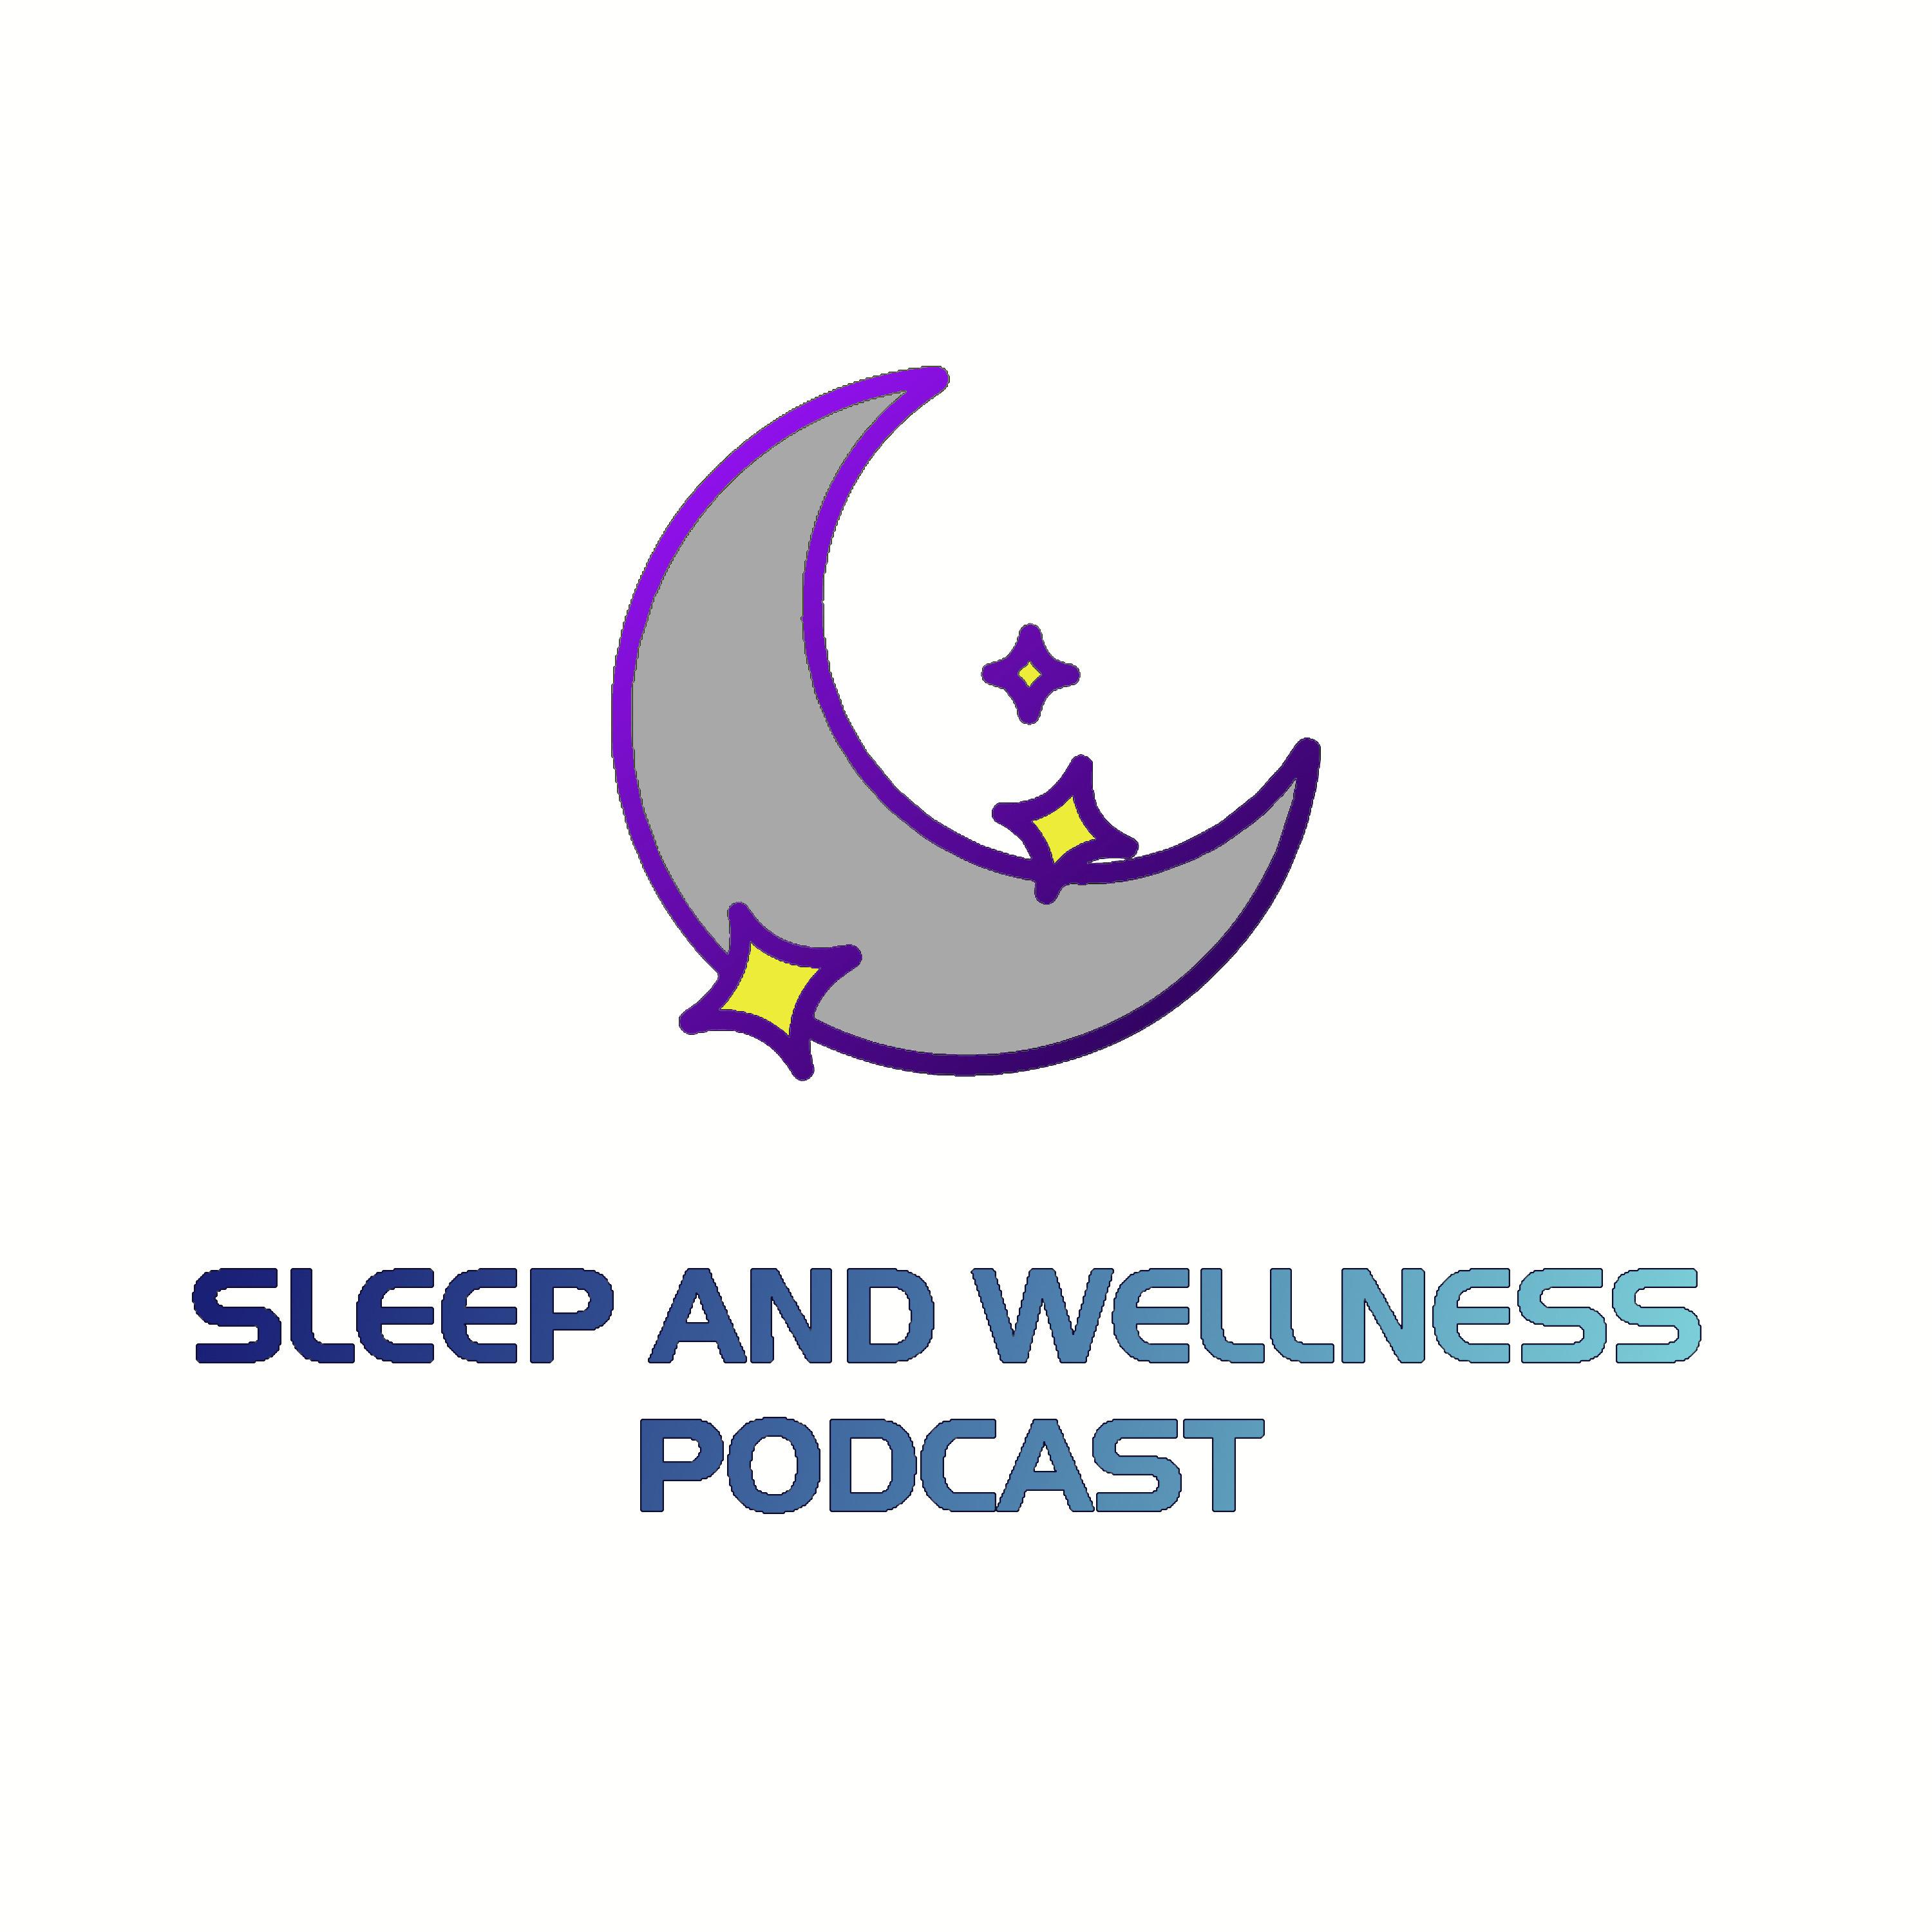 Sleep And Wellness Podcast - Soundscapes For The Soul